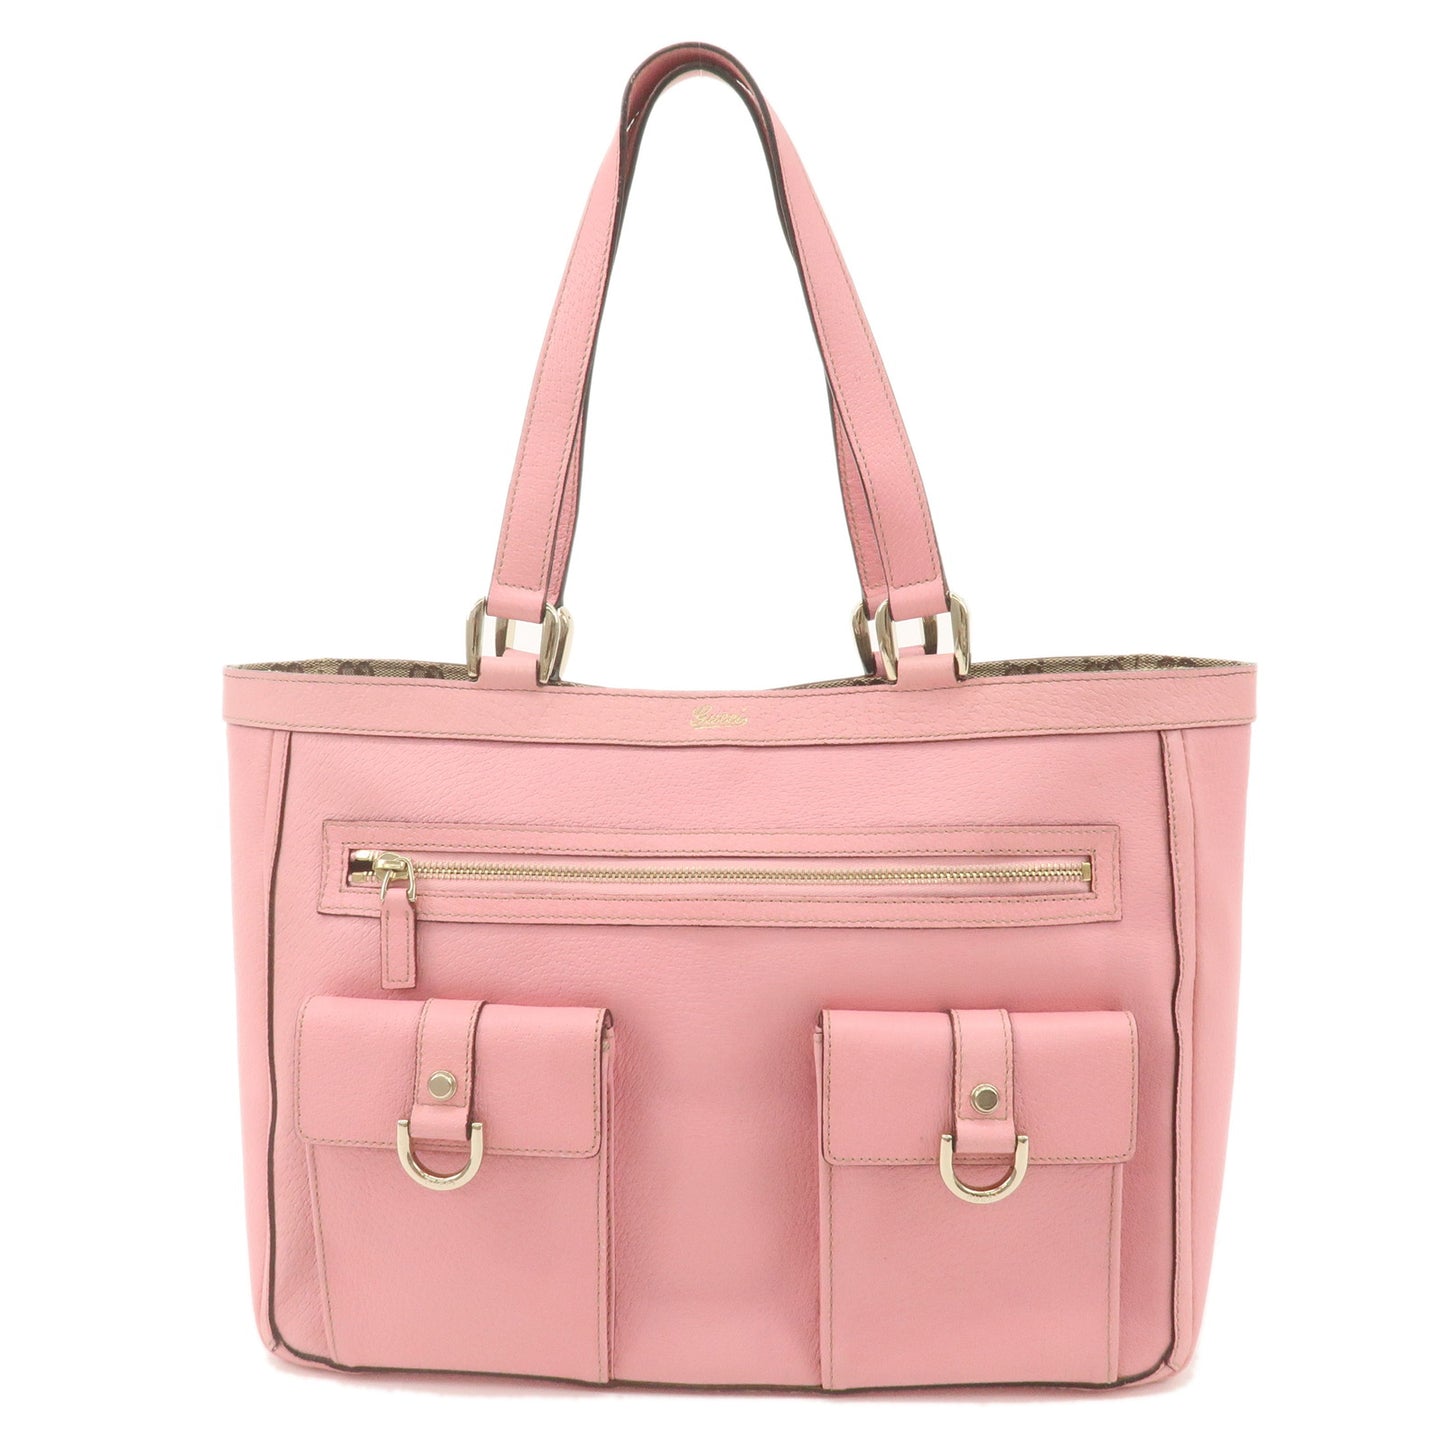 GUCCI-Abbey-Leather-Tote-Bag-Hawaii-Limited-Pink-147651